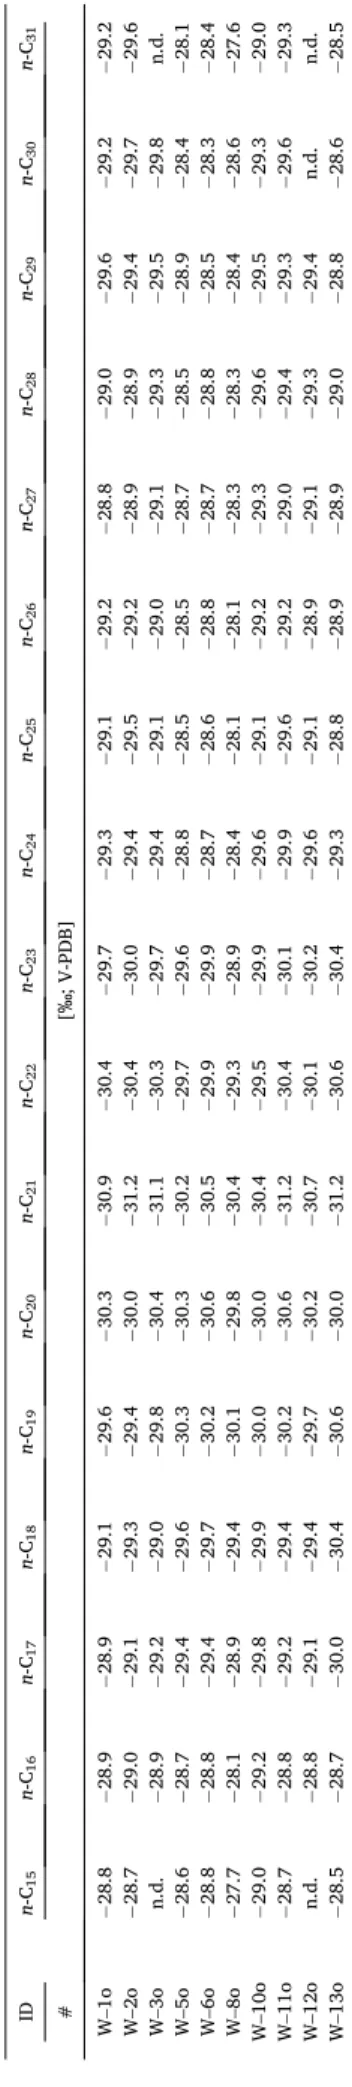 Table 4  Compound-specific stable carbon isotope of investigated oil samples.   ID n-C 15 n-C16 n-C17 n-C18 n-C19 n-C20 n-C21 n-C22 n-C23 n-C24 n-C25 n-C26 n-C27 n-C28 n-C29 n-C30 n-C31  # [‰; V-PDB]  W–1o −28.8 −28.9 −28.9 −29.1 −29.6 −30.3 −30.9 −30.4 −2